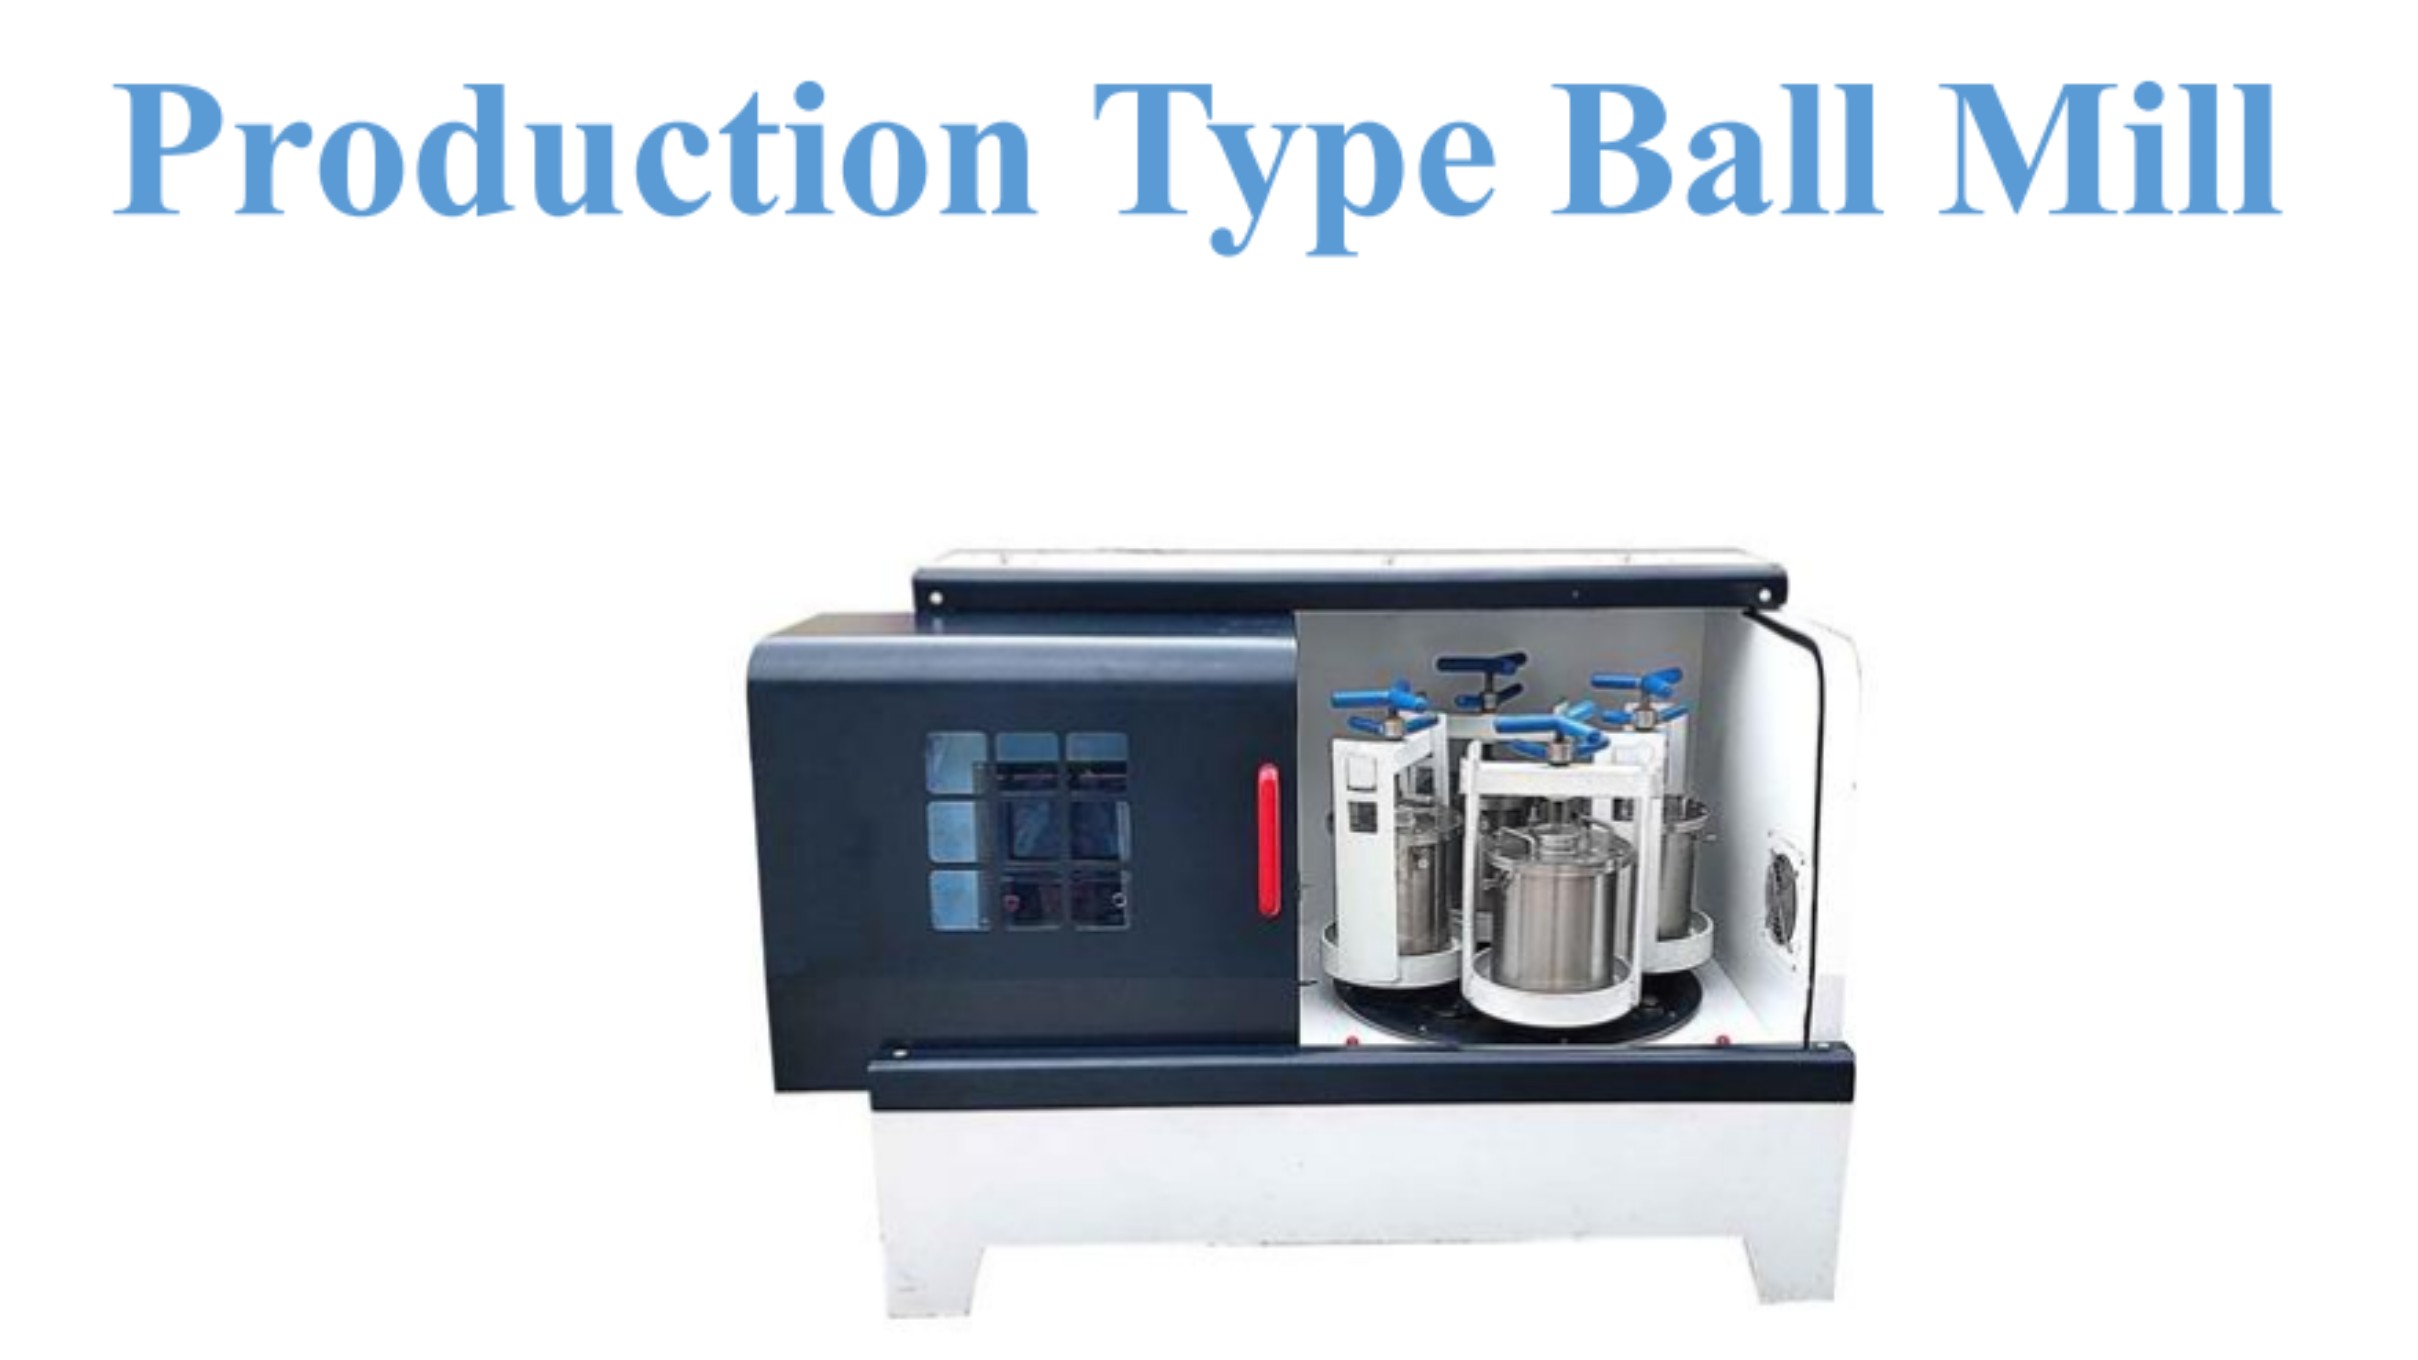 Production Type Ball Mill